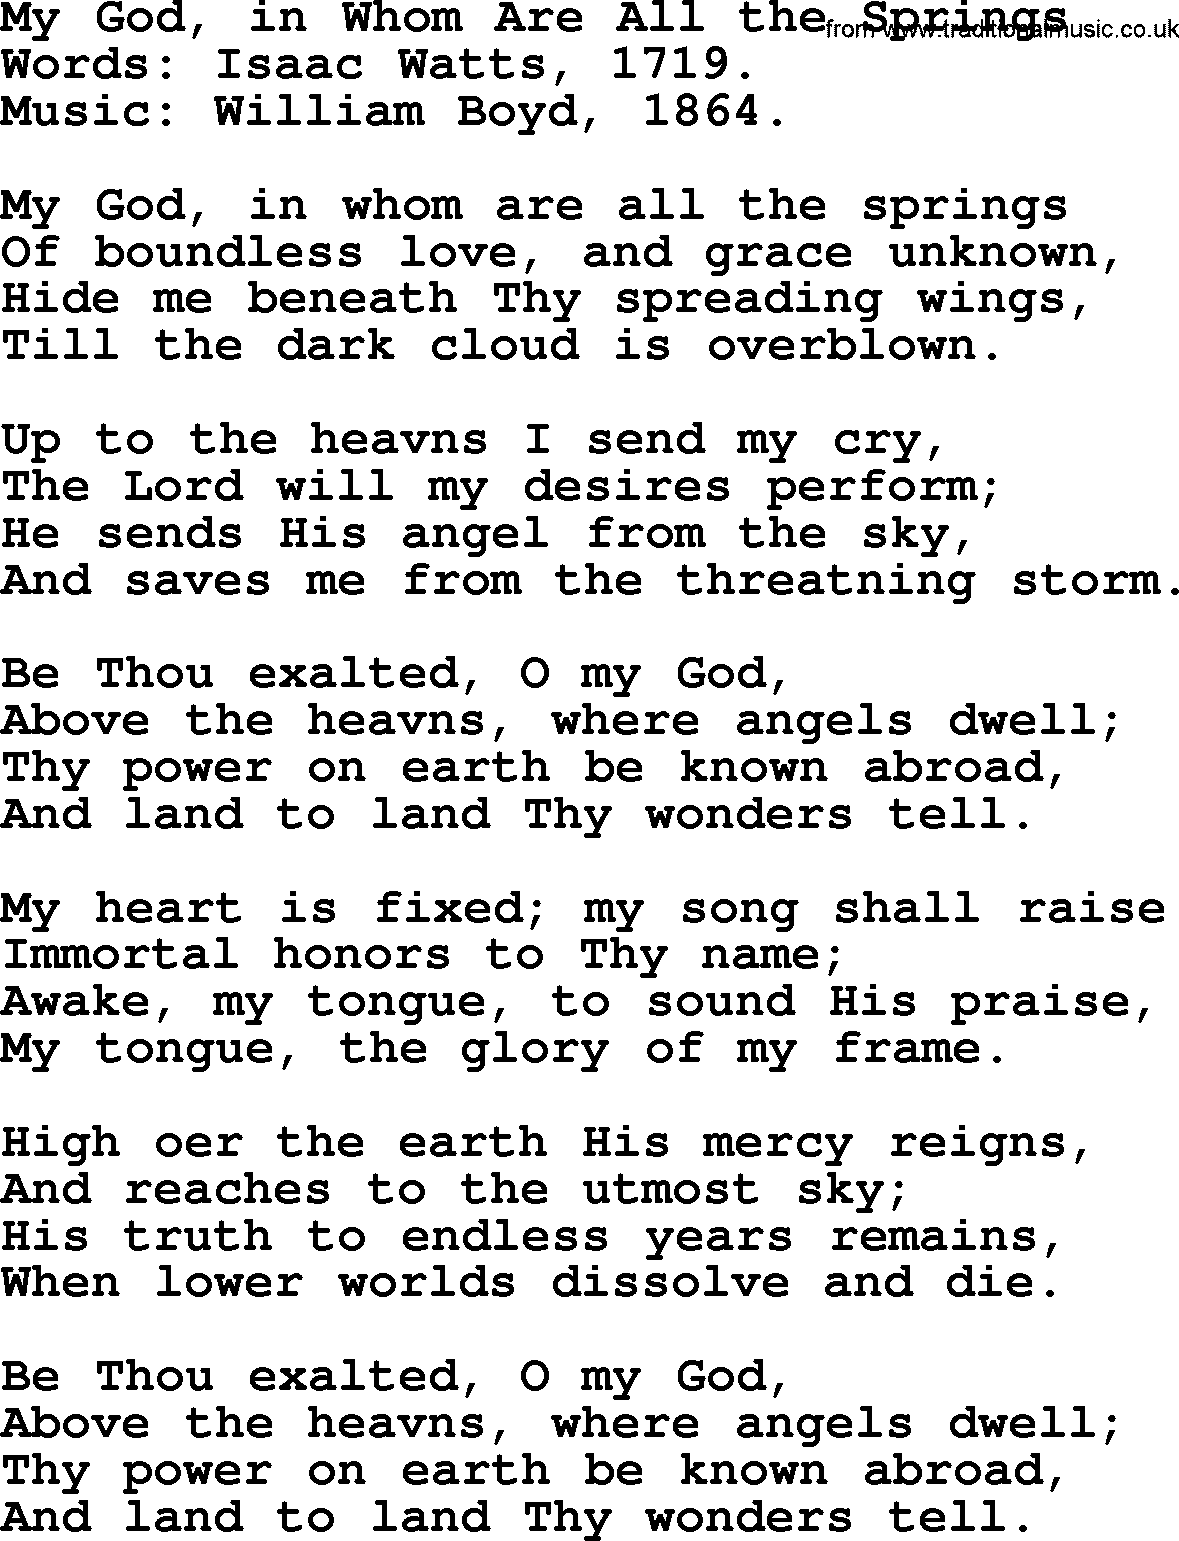 Isaac Watts Christian hymn: My God, in Whom Are All the Springs- lyricss